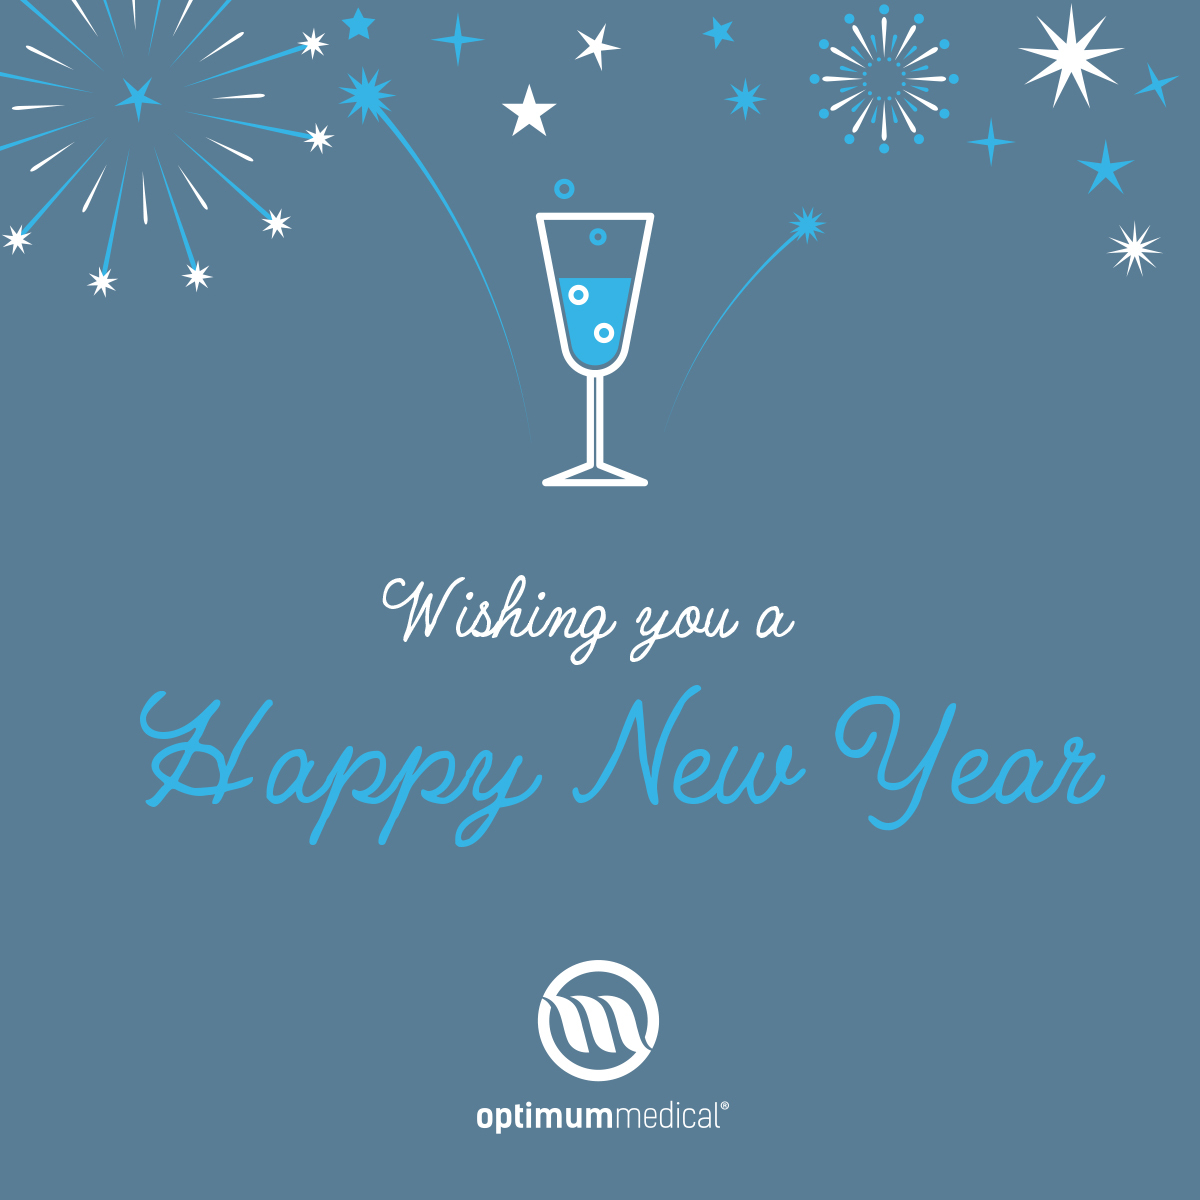 RT @OptimumMedical: Optimum Medical wishes you a very Happy New Year! https://t.co/9PGKnhMmNB